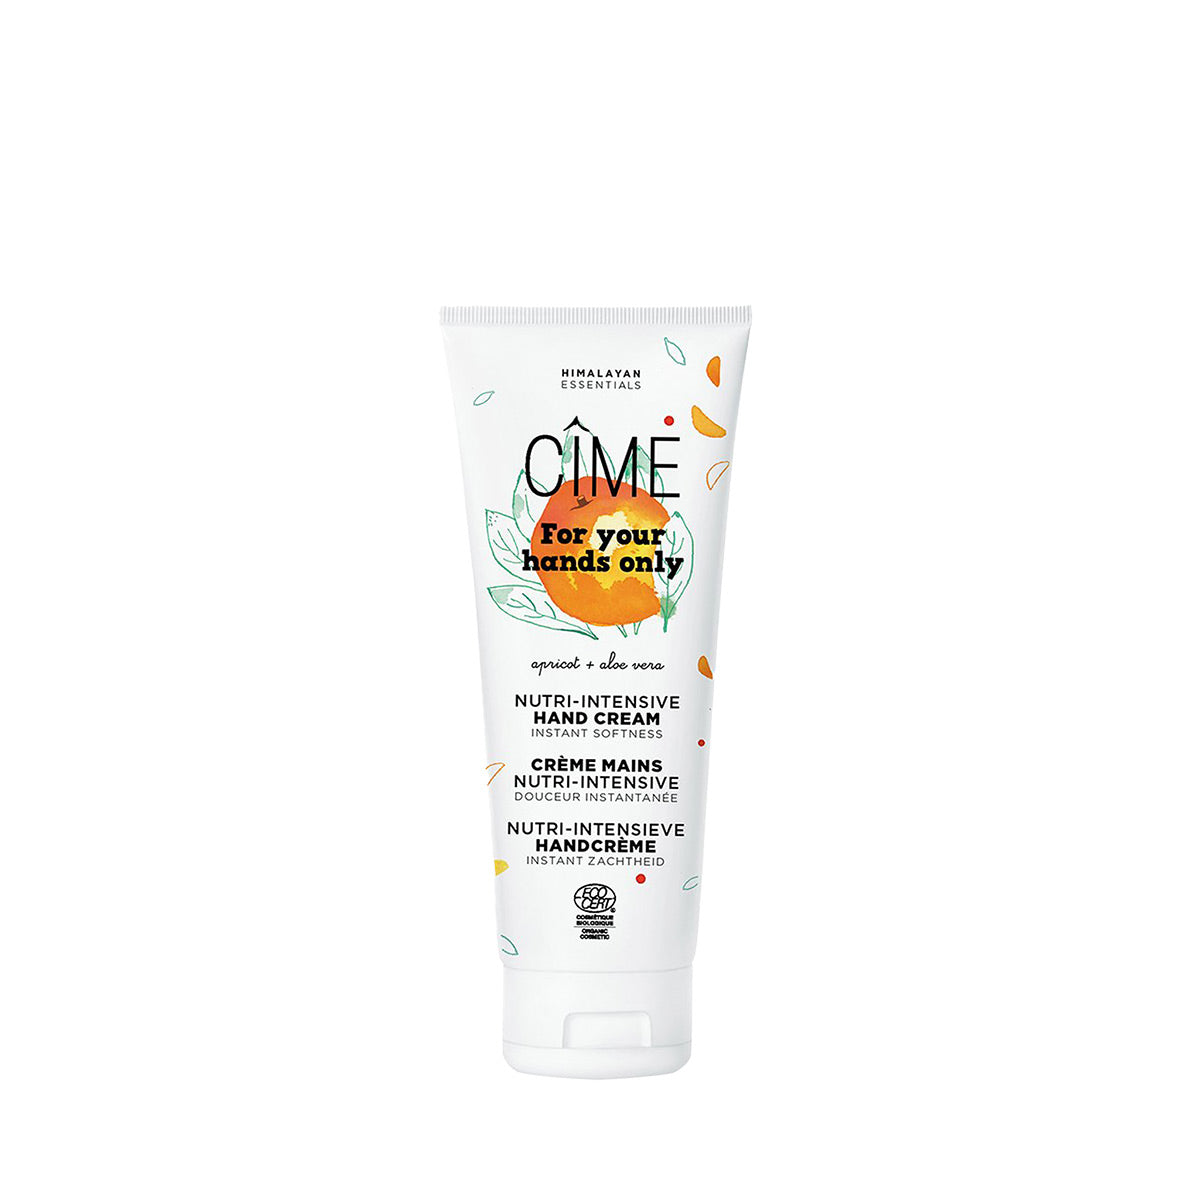 CÎME For your hands only | Nutri-intensive hand cream 75mL